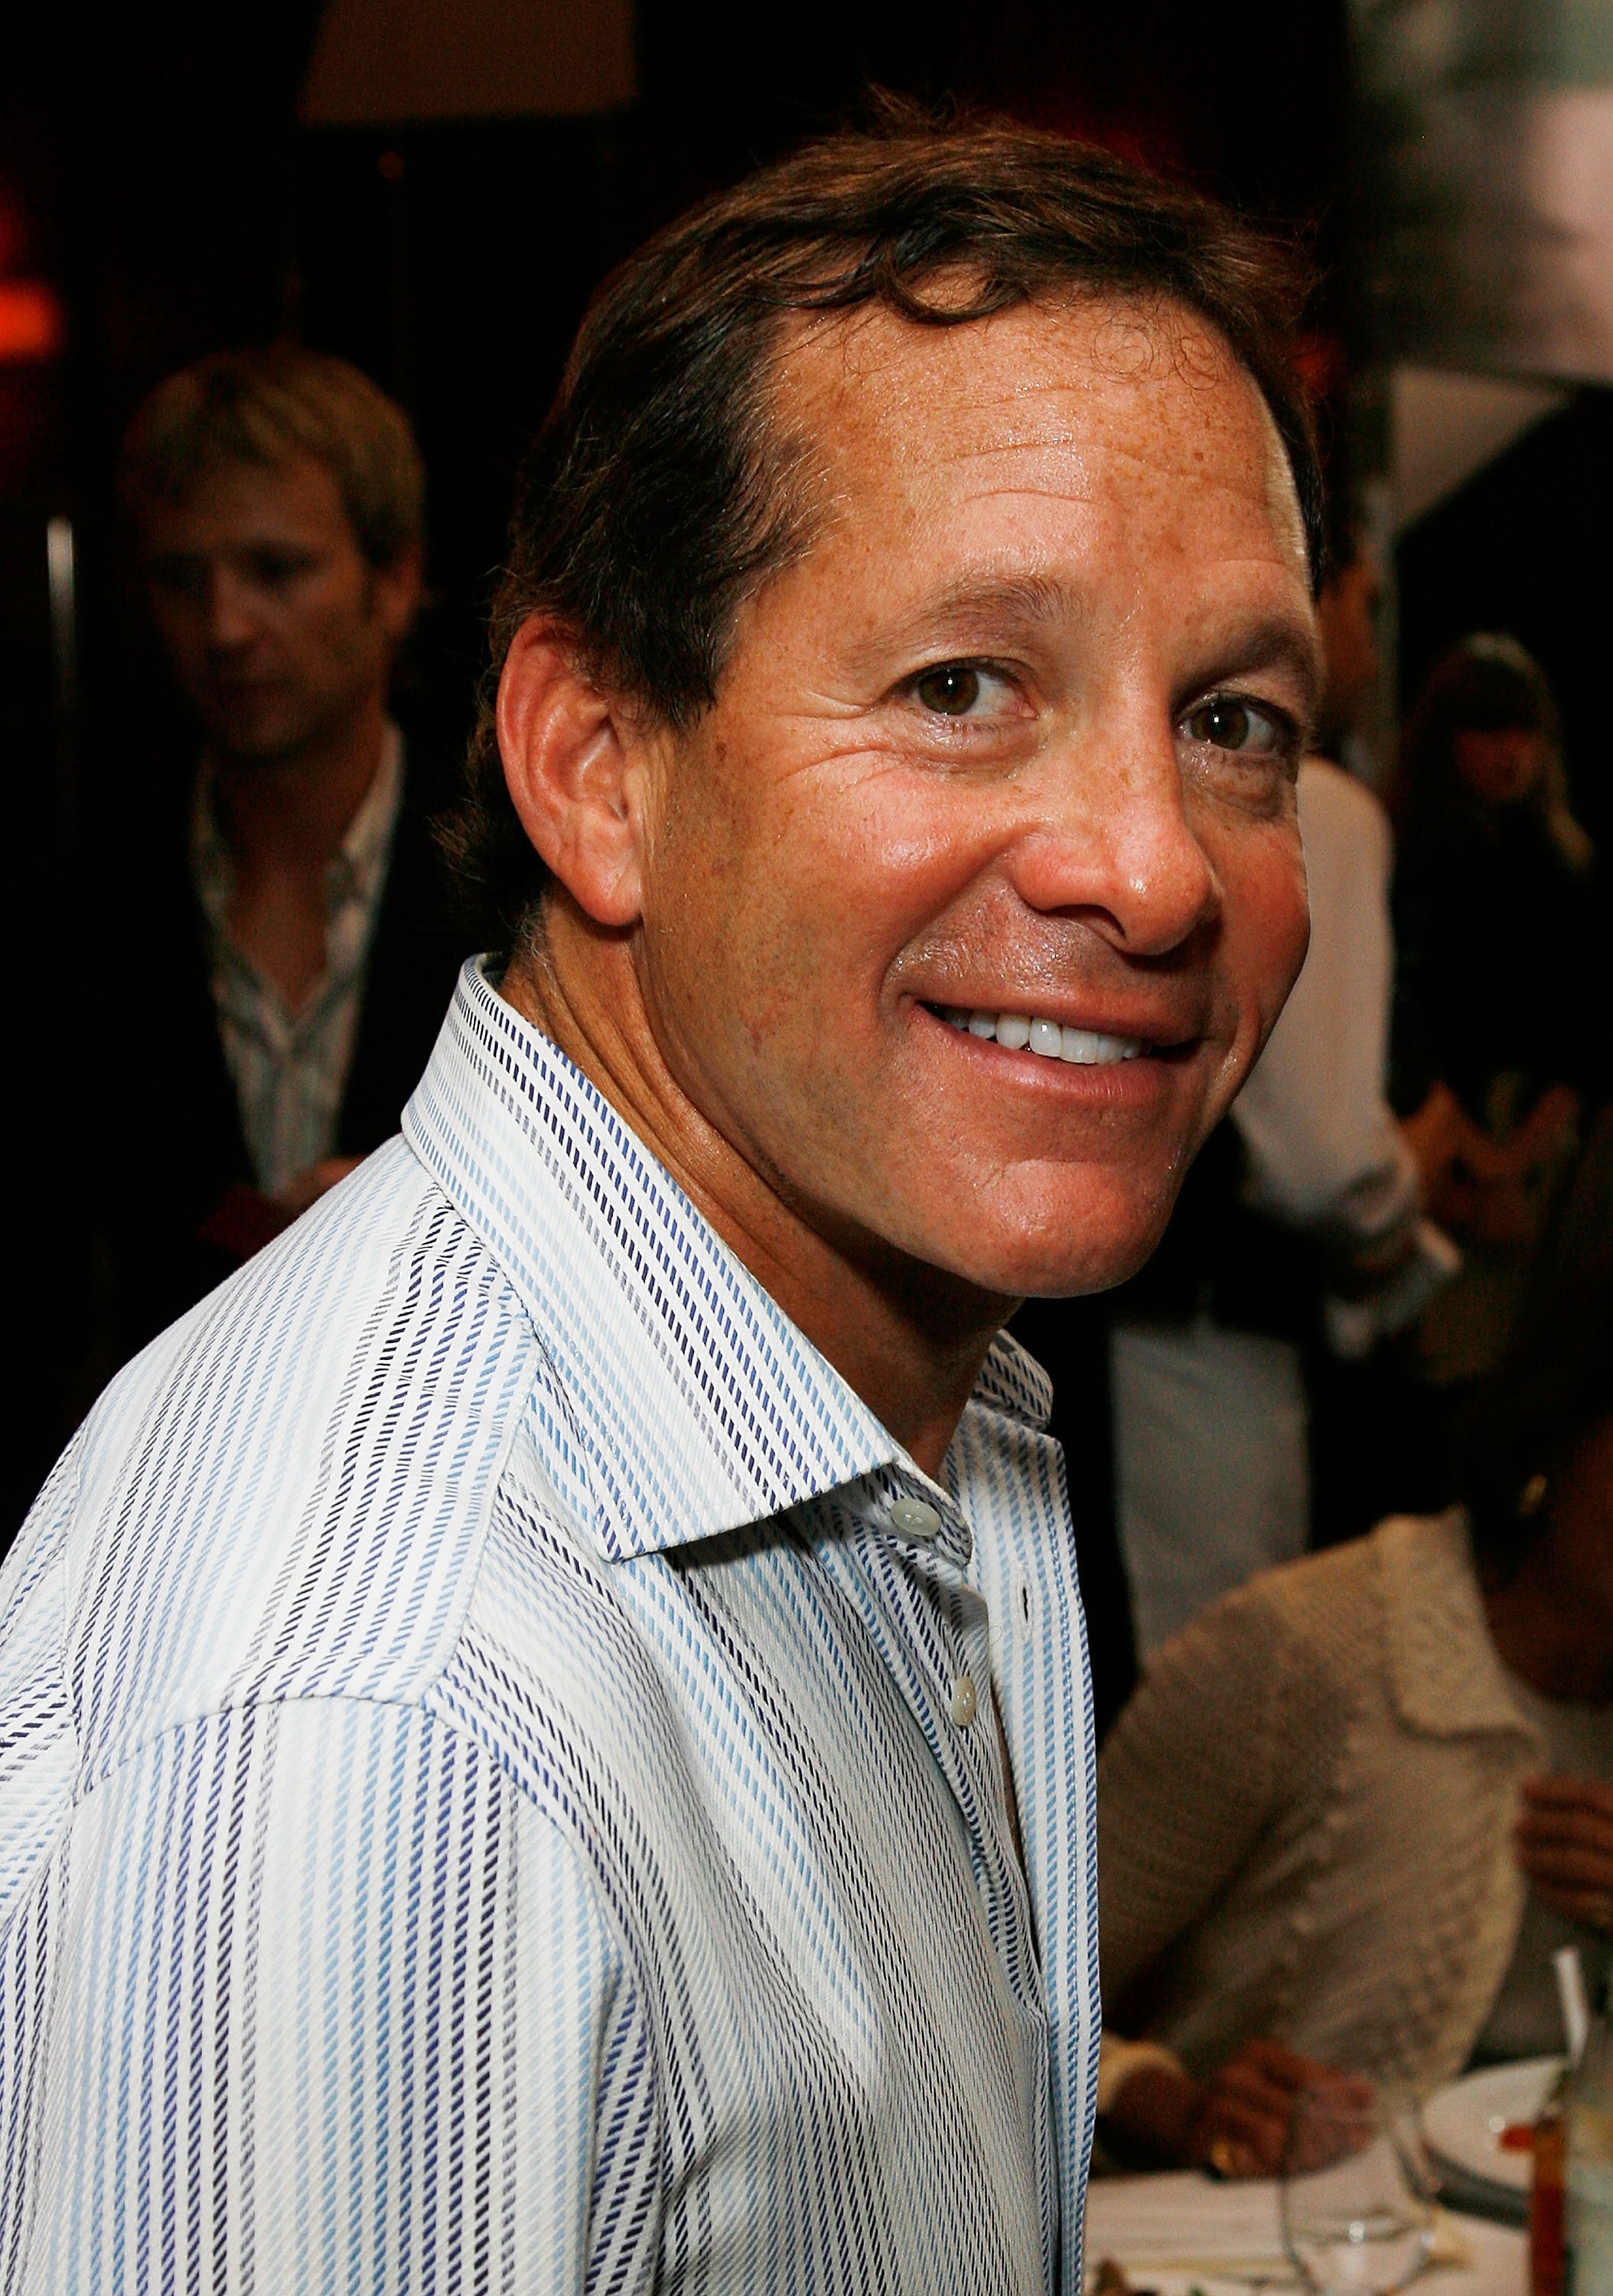 Actor Steven Guttenberg at the "Religulous" Luncheon at Brasserie Ruhlmann on September 29, 2008 in New York City. | Source: Getty Images